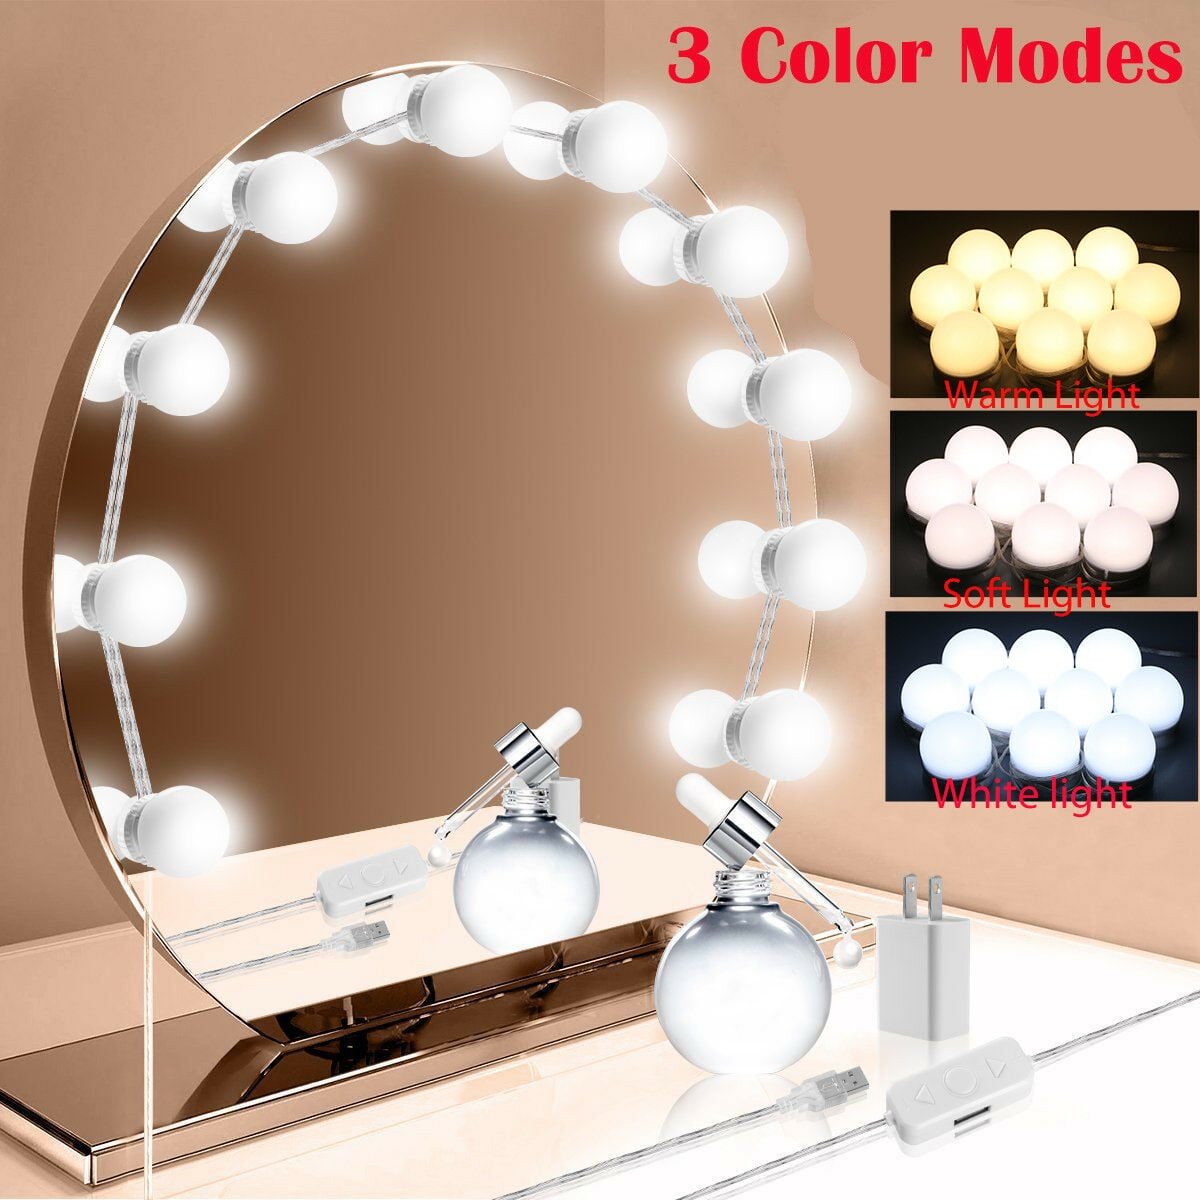 Led Mirror Light Kit For Vanity Set, Replacement Led Strip Lights For Bathroom Mirrors